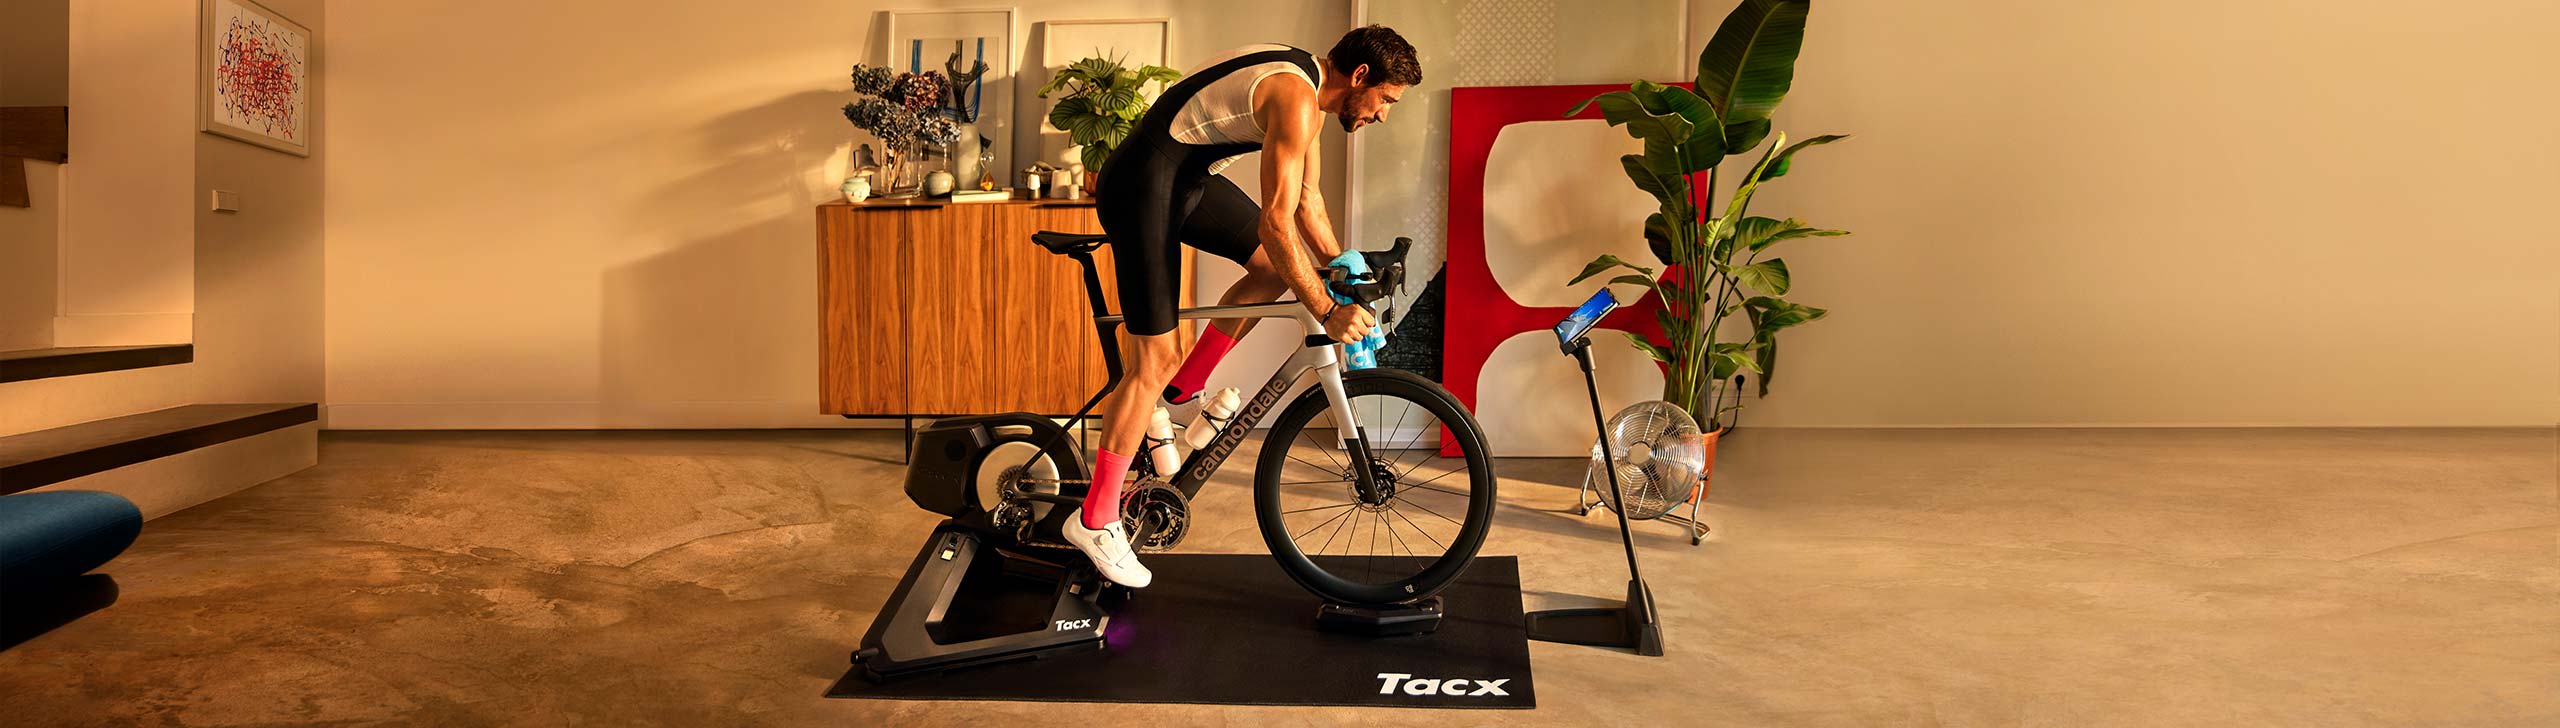 Tacx Indoor Cycling, Sports & Fitness